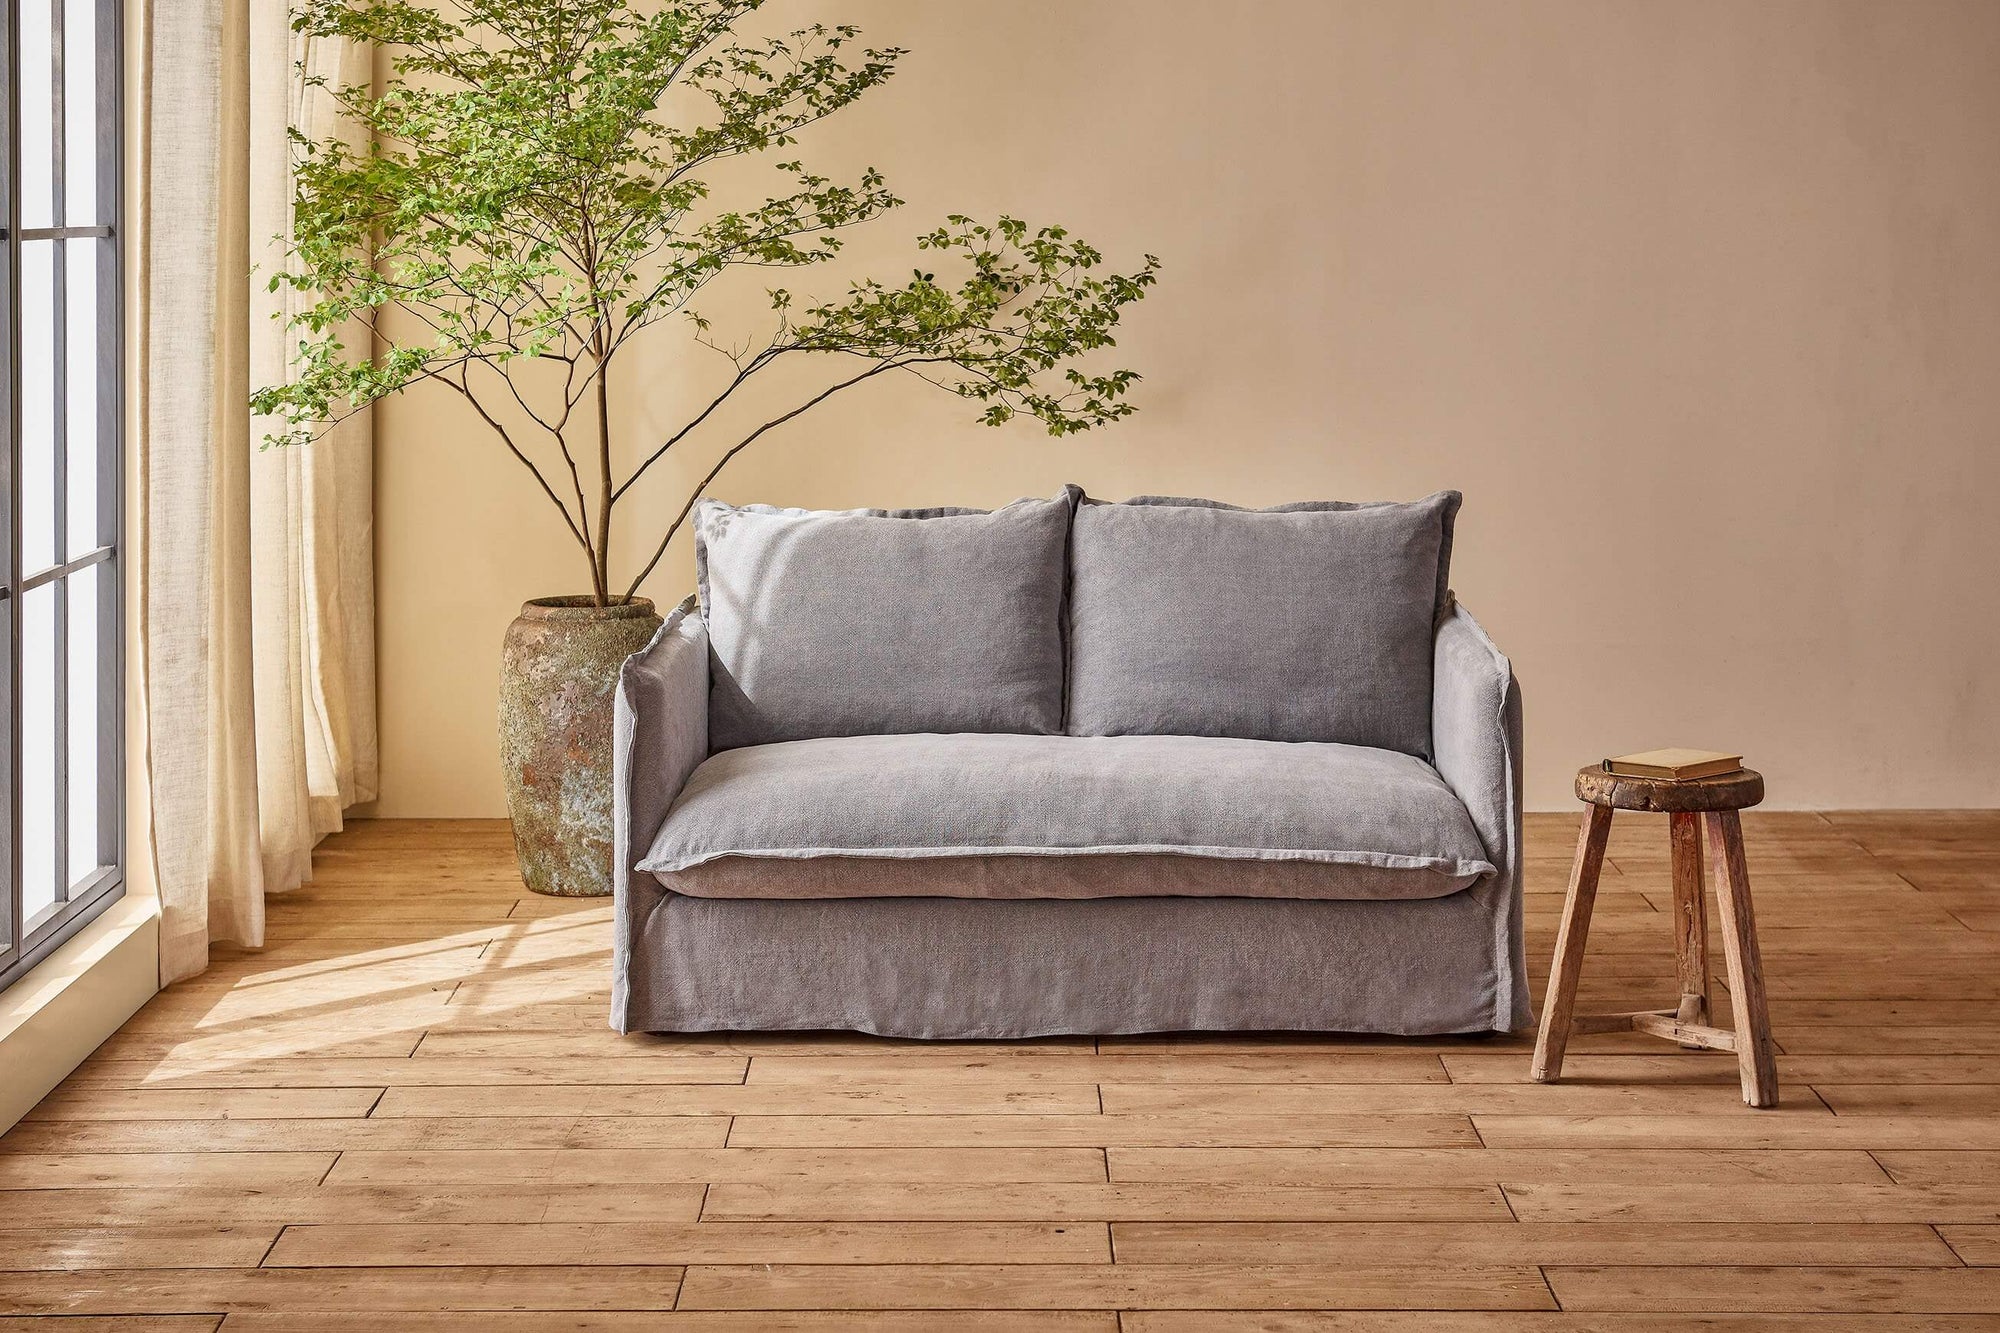 Neva 62" Loveseat in Ink Cap, a medium cool grey Light Weight Linen, placed in a sunlit room between a potted tree and a stool